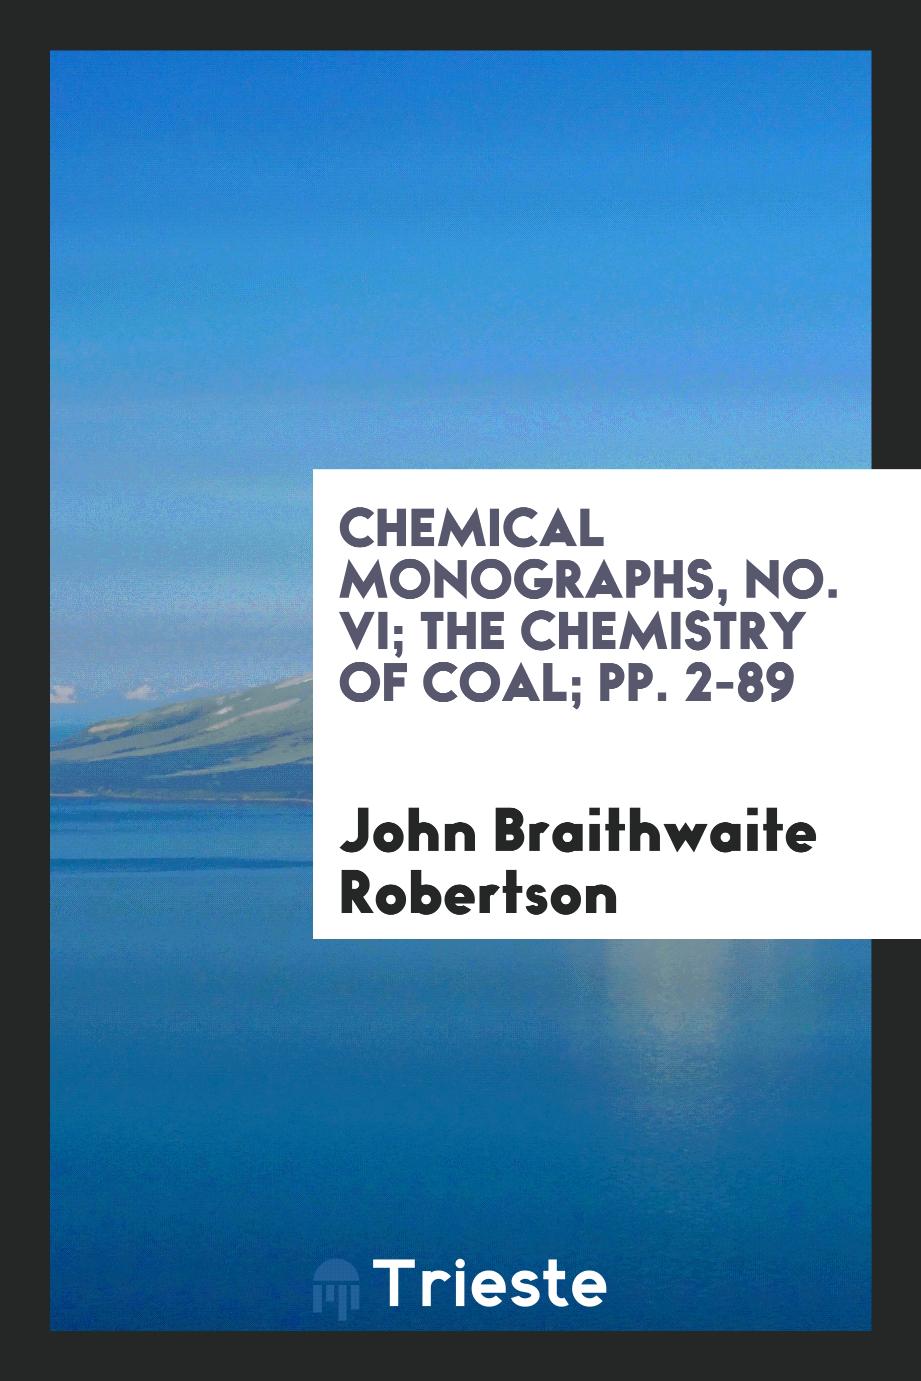 Chemical Monographs, No. VI; The Chemistry of Coal; pp. 2-89